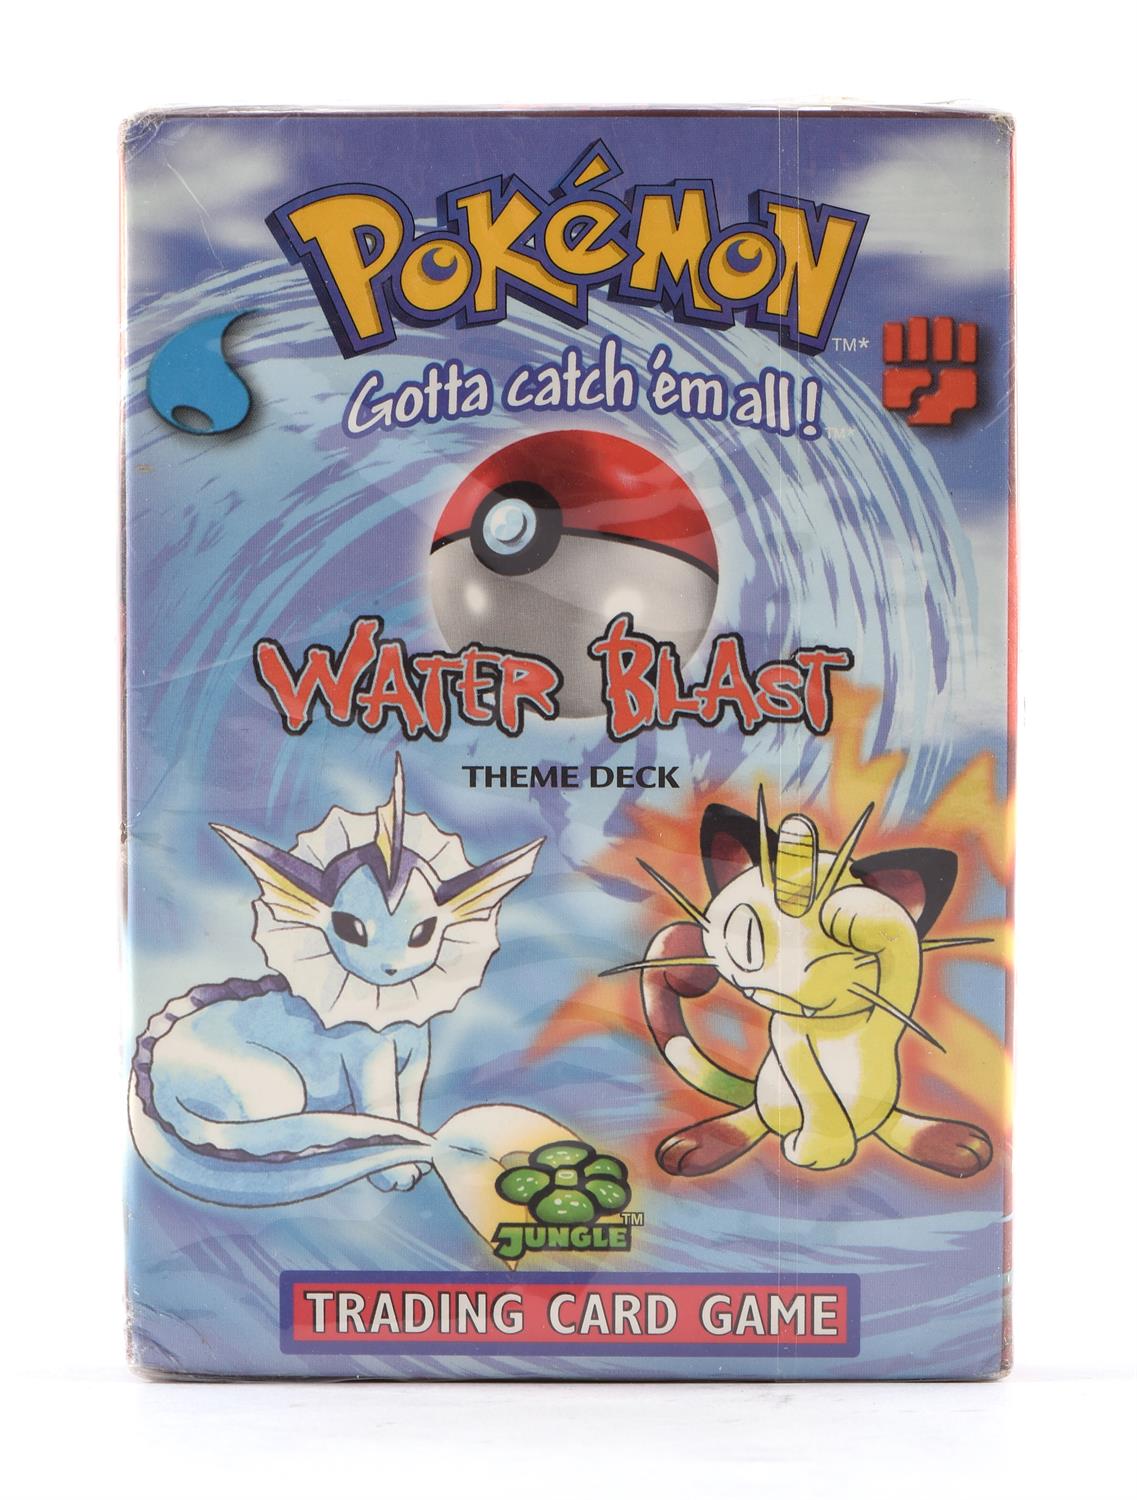 Pokemon TCG. Jungle Water Blast Theme Deck, sealed in original packaging. This lot contains a - Image 2 of 7